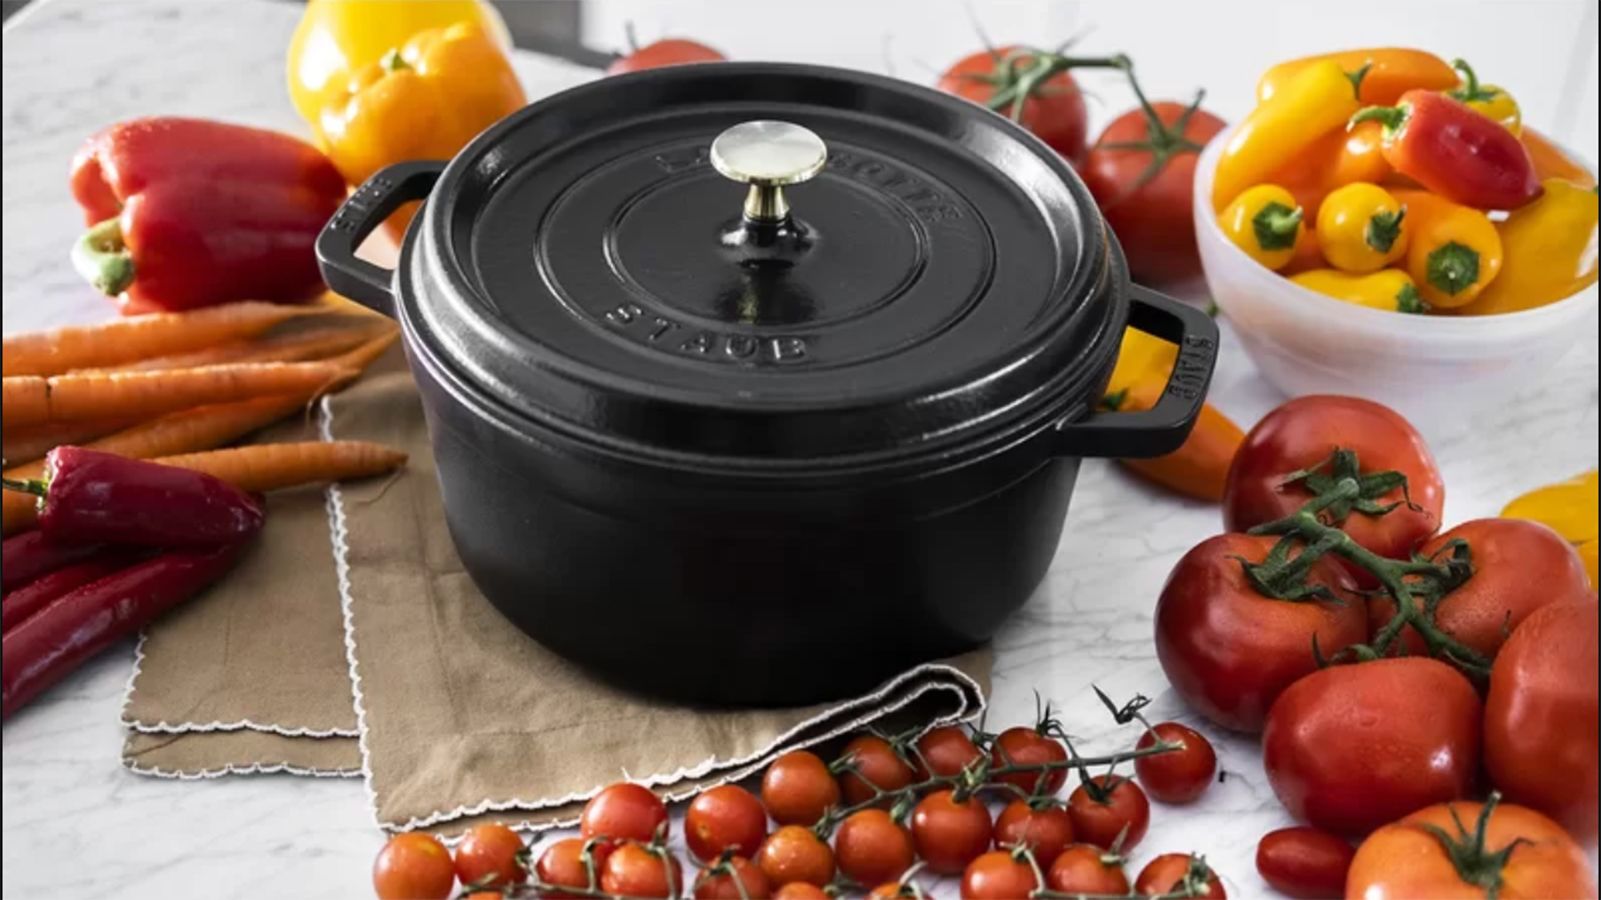 The Lodge Double Dutch Oven Is On Sale Ahead Of The Prime Early Access Sale